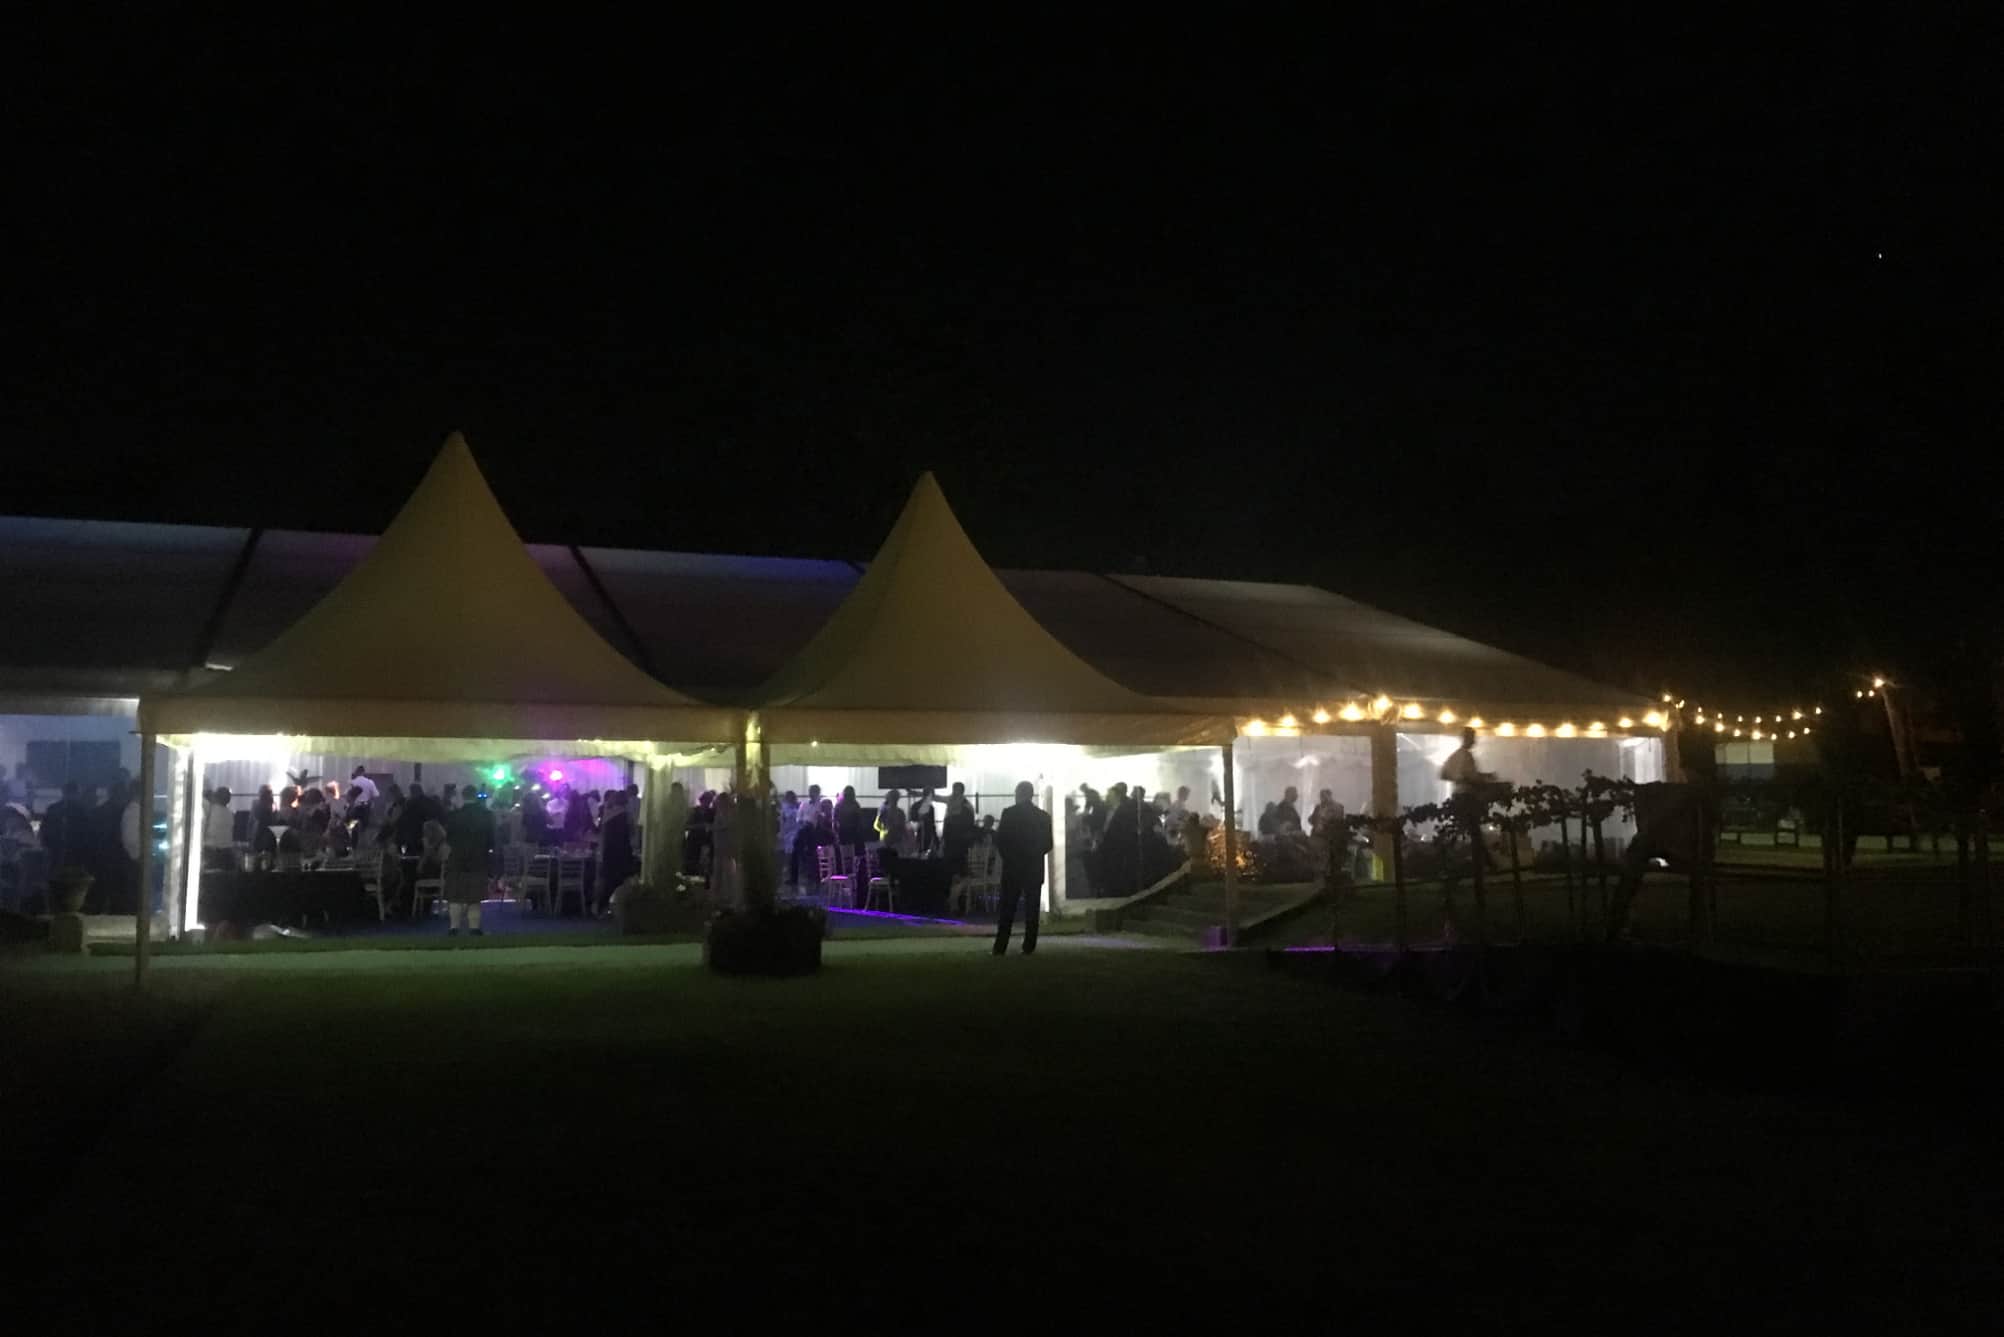 Marquee lit up at night at Badminton School